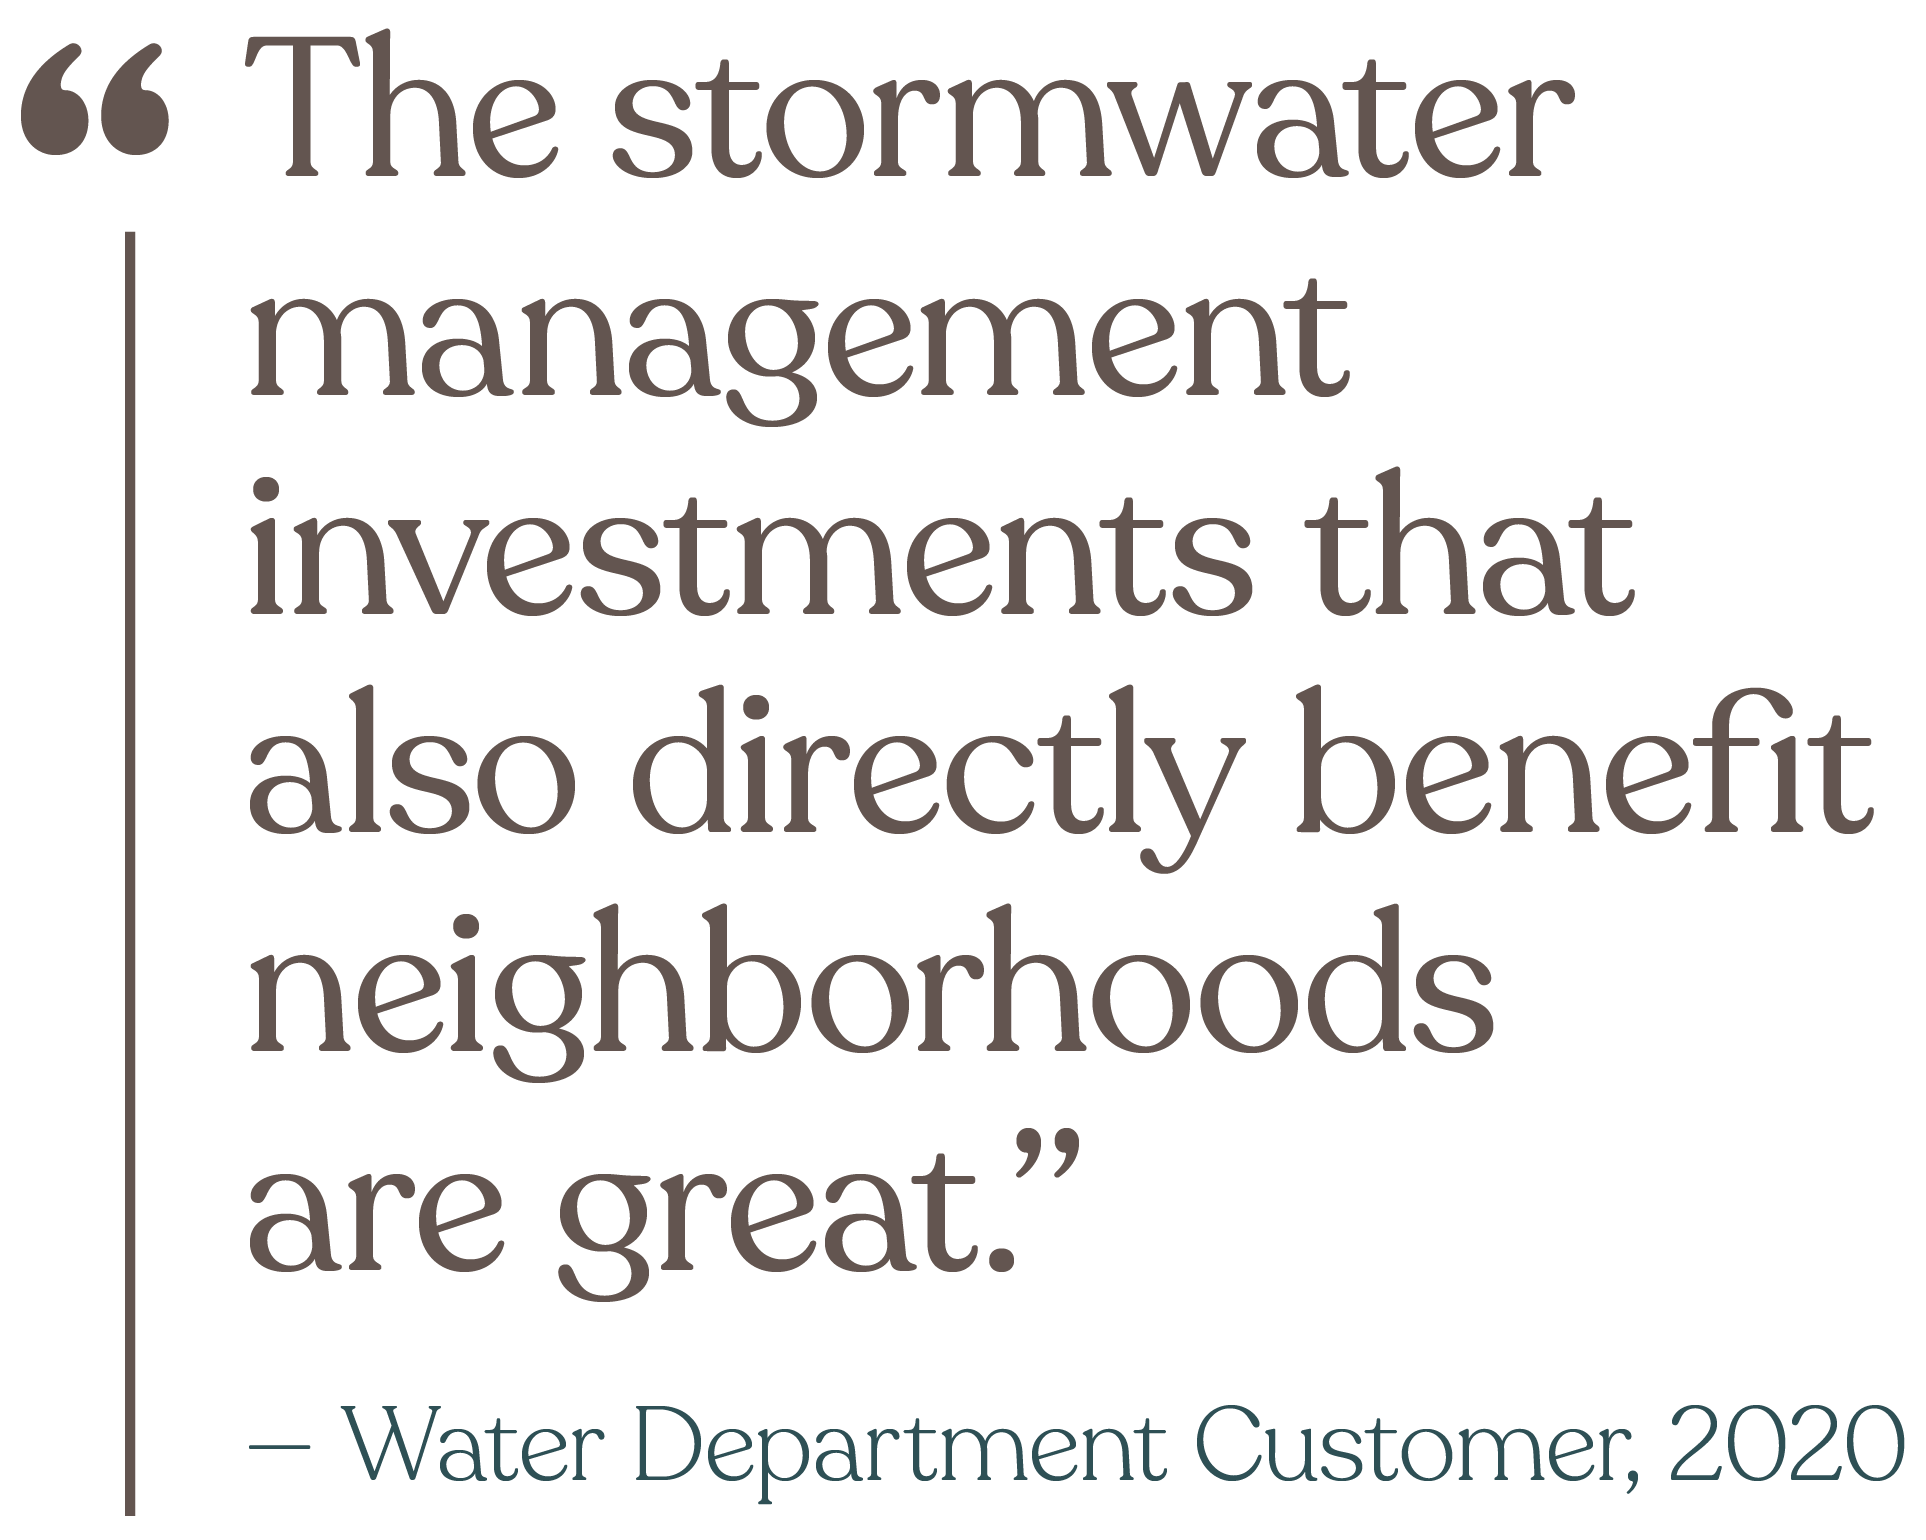 The stormwater management investments that also directly benefit neighborhoods are great. (from a Water Department Customer in 2020)